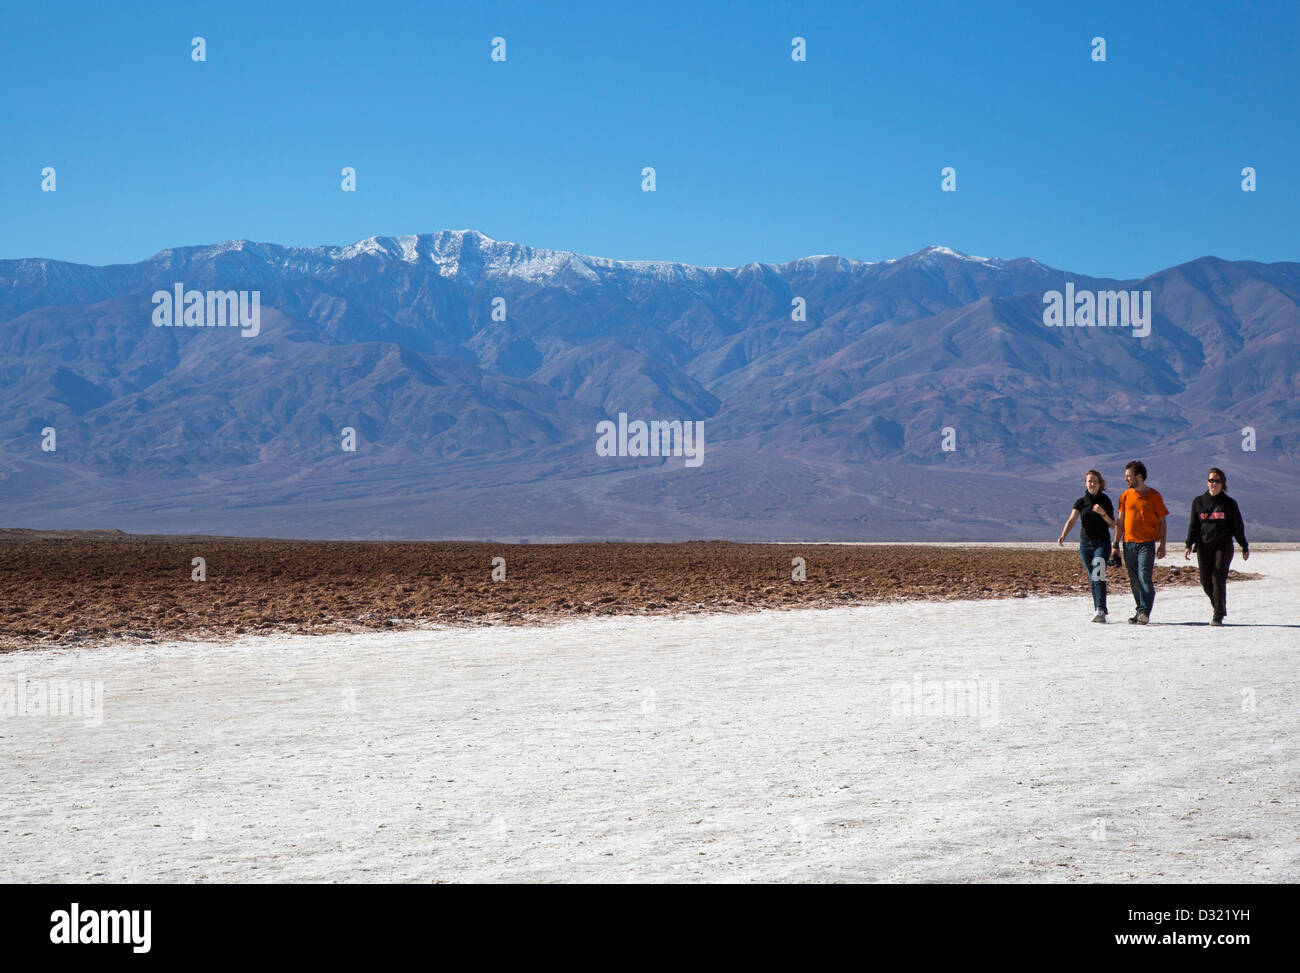 Death Valley National Park, California - Tourists on the salt flat in Badwater Basin. Stock Photo